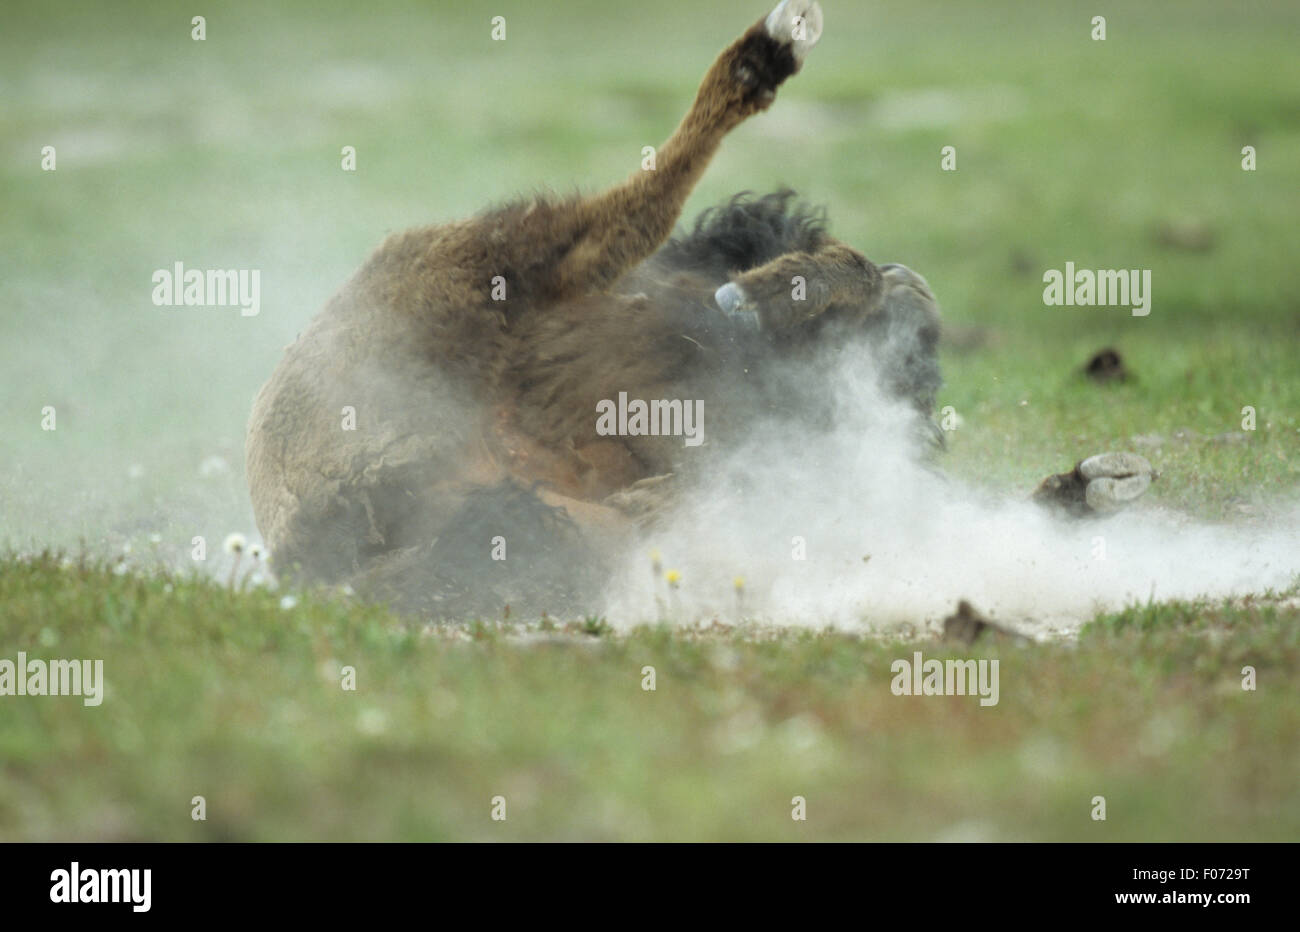 Bison rolling on its back in the dirt creating a dust cloud with its feet in the air Stock Photo